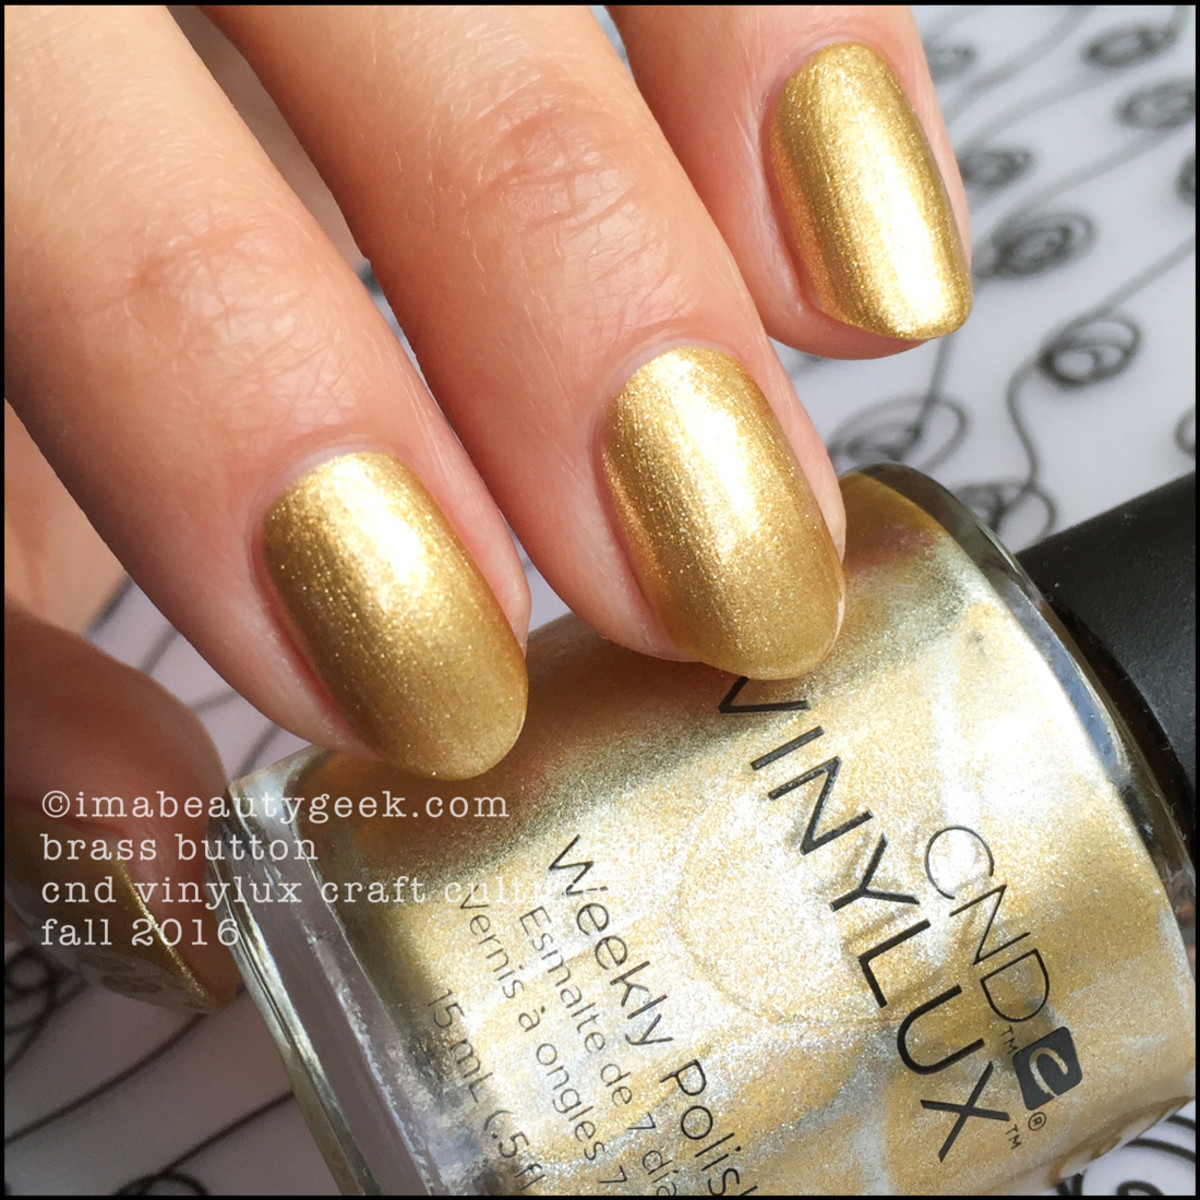 CND VINYLUX CRAFT CULTURE FALL 2016 SWATCHES REVIEW - Beautygeeks